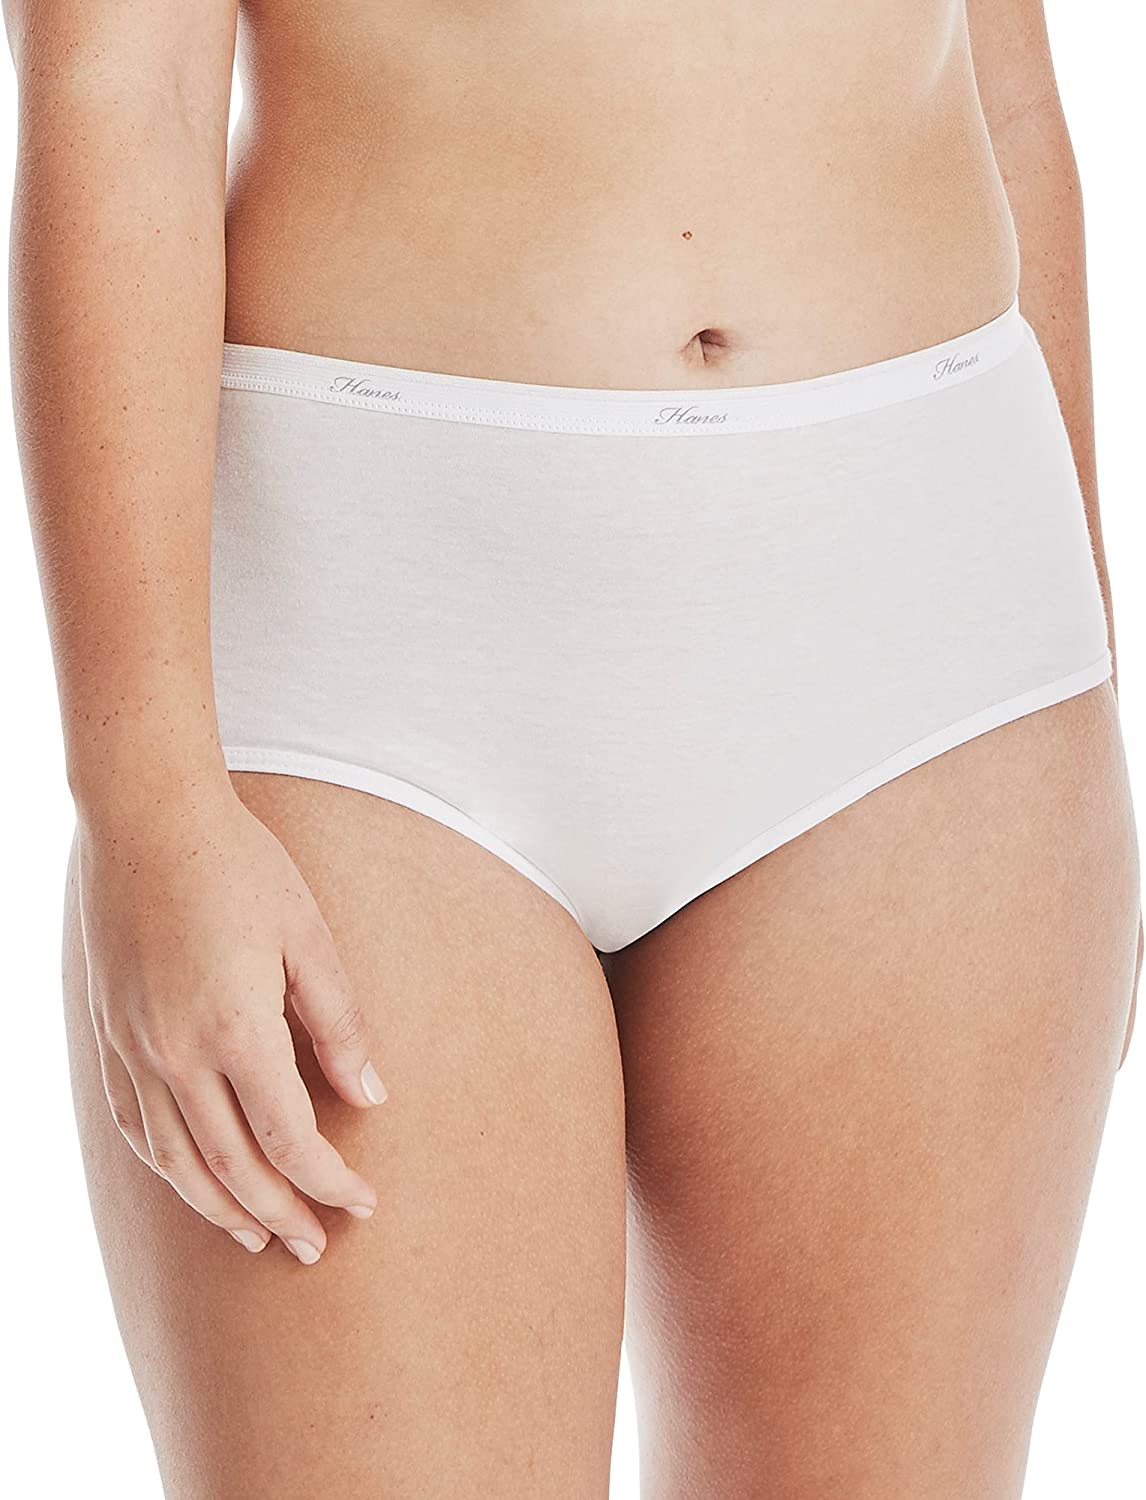 Hanes Women's Breathable Cotton Hi-Cuts Panty, White, 10-Pack, 9 at   Women's Clothing store